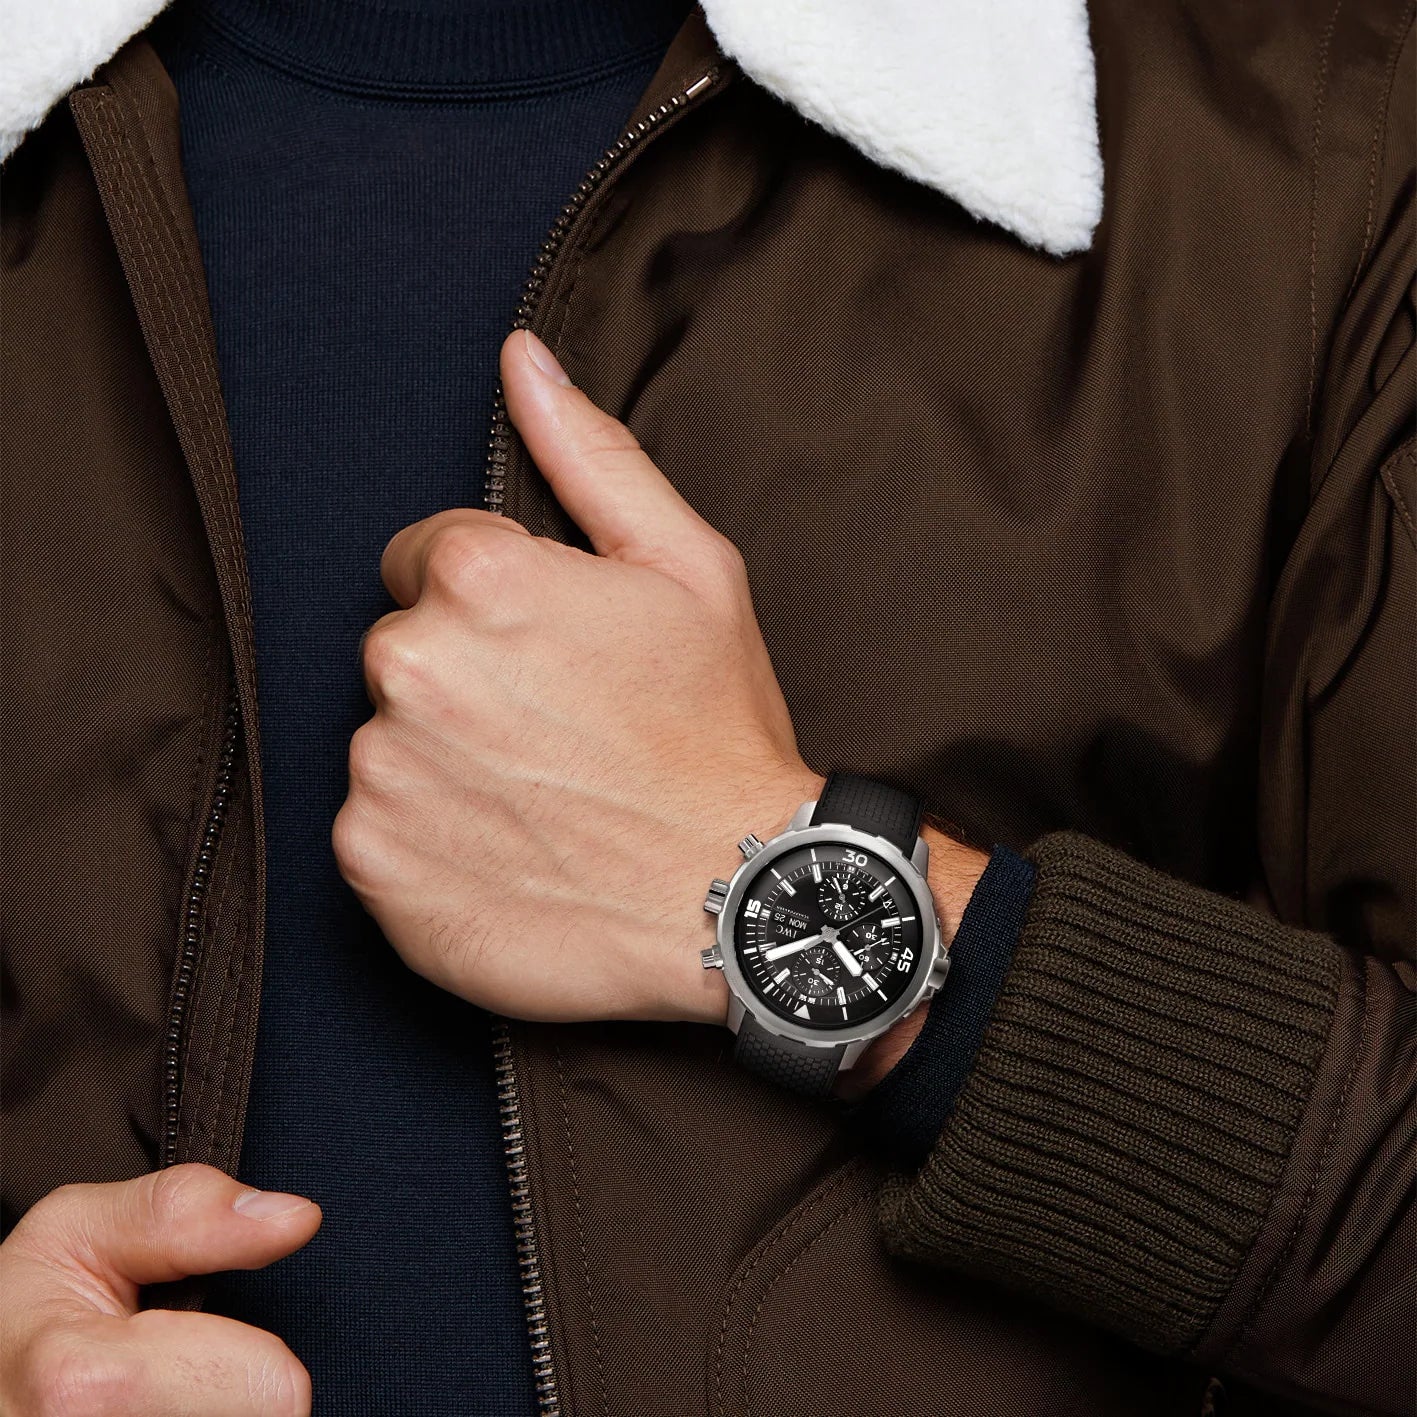 Top 5 Winter Watches: Time's Answer to Frosty Fashion!